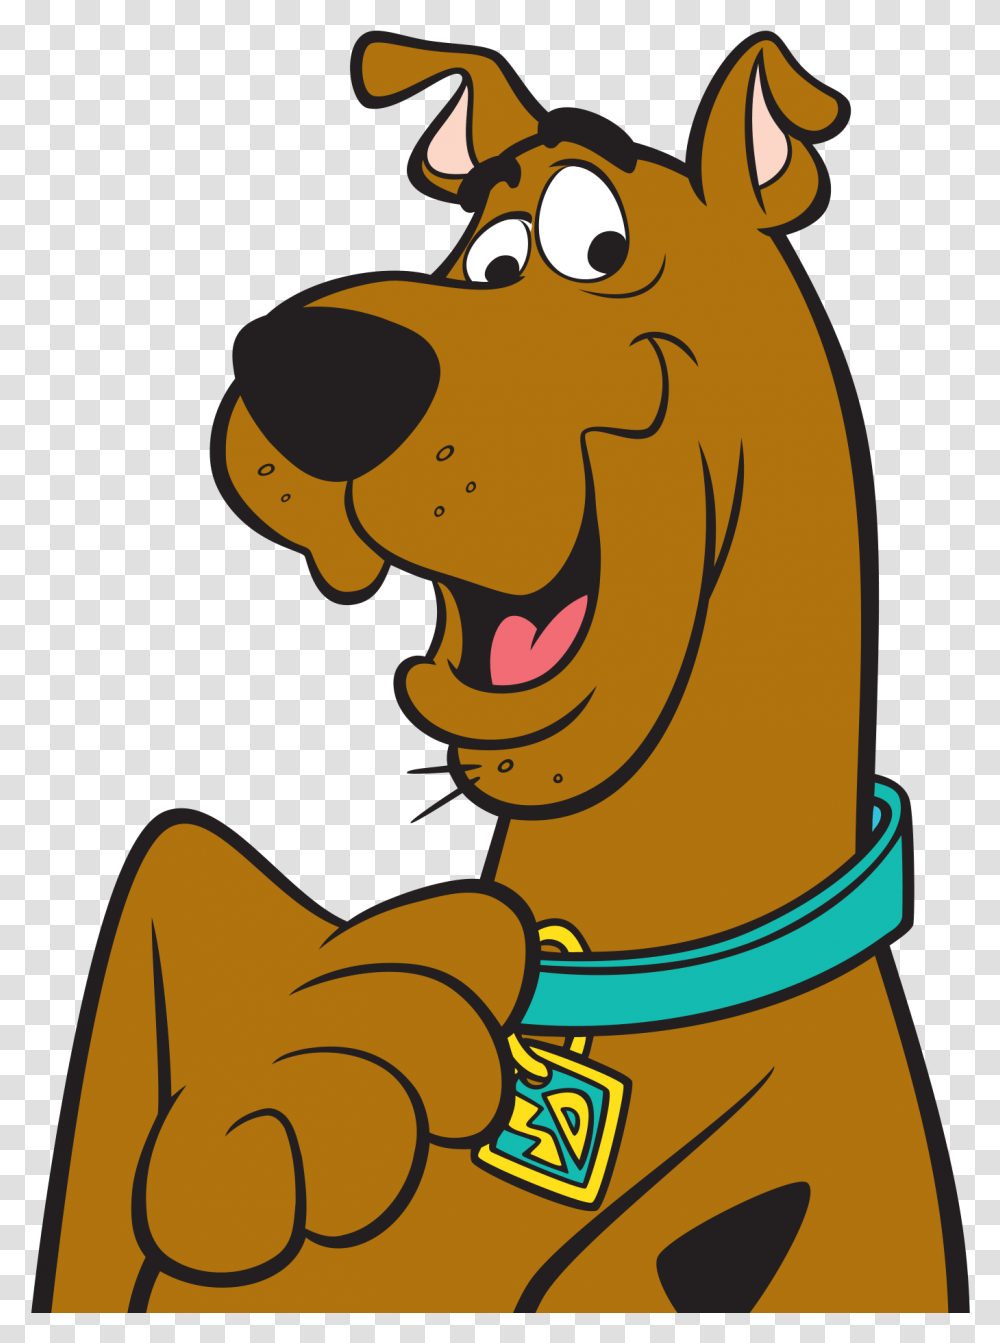 Scooby Doo Hanna Barbera Scooby Doo Toy, Teeth, Mouth, Lip, Hand Transparent Png